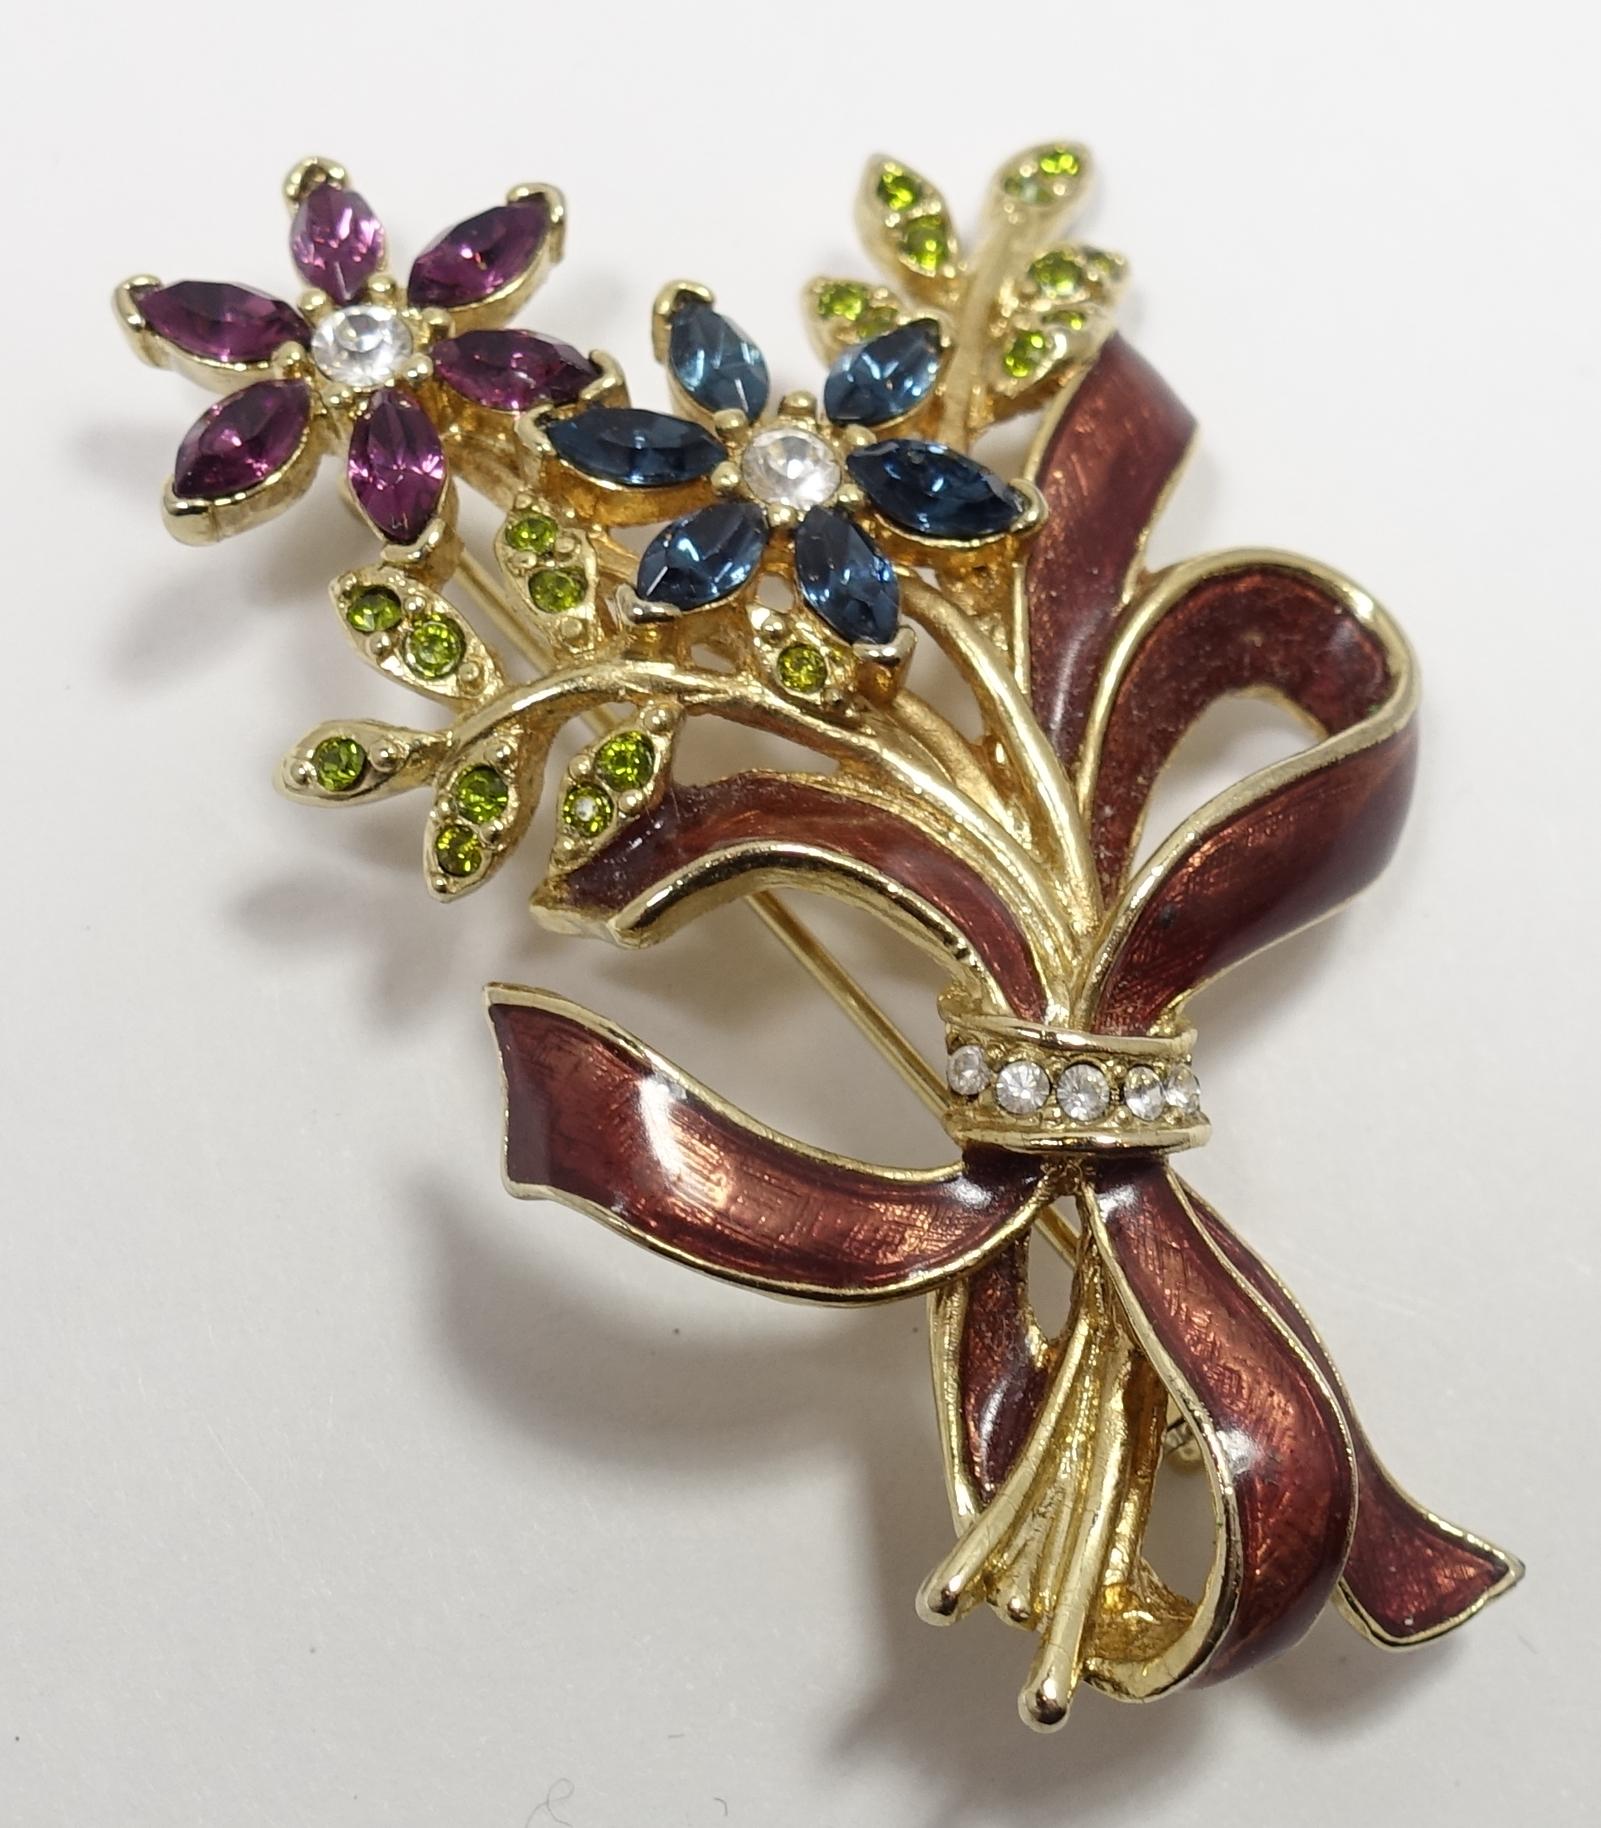 This vintage signed Monet brooch has a floral design with blue, peridot, purple and clear crystals with enameled ribbons circling the gold tone stems.  This brooch measures 2-5/8” x 1-3/4” and is signed “Monet”.  It is in excellent condition.